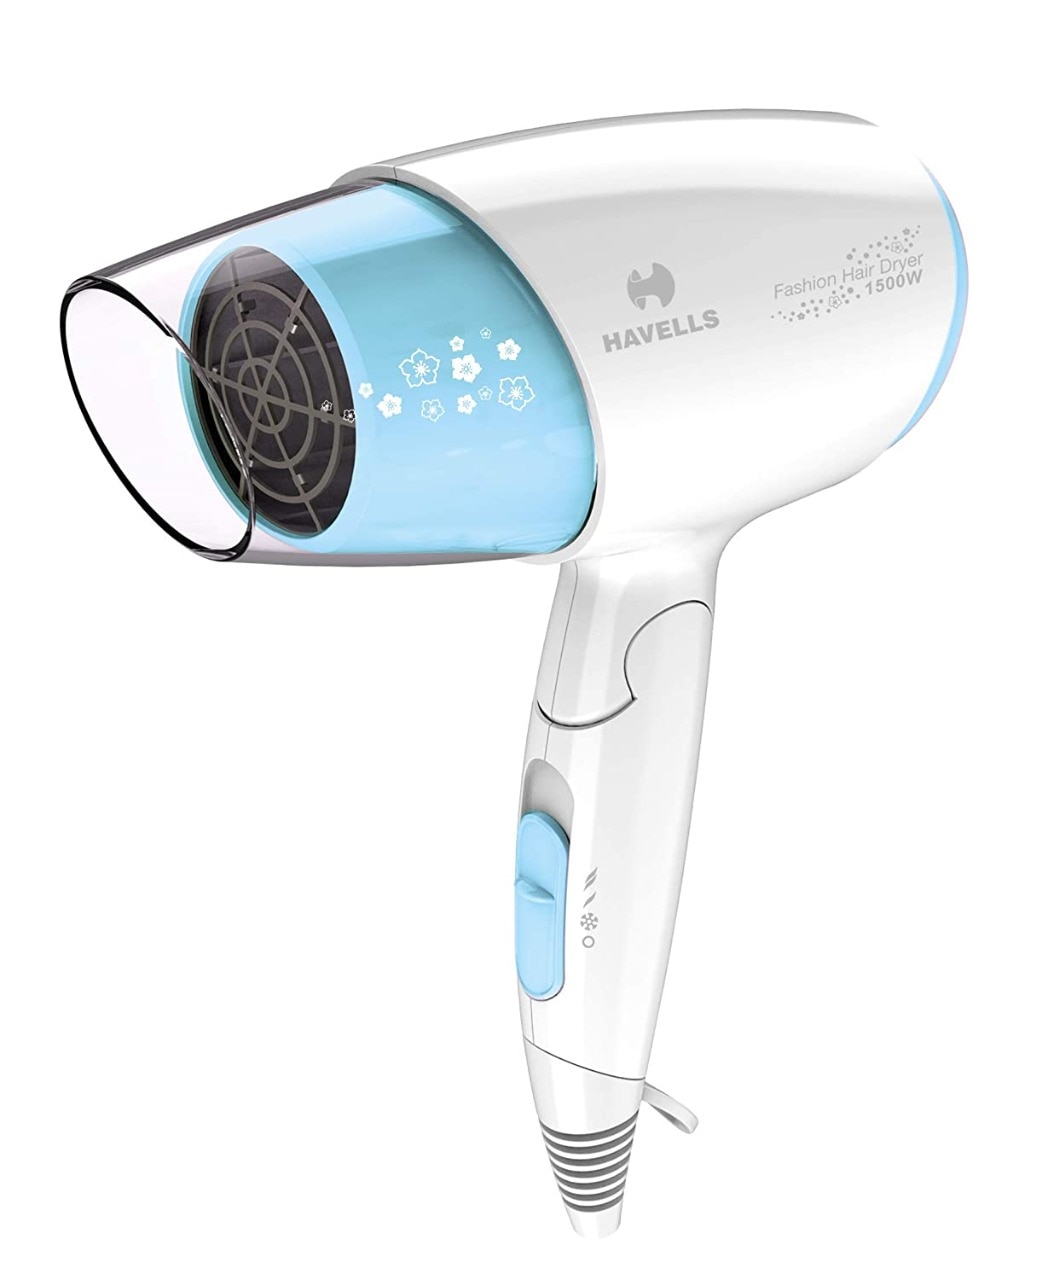 Amazon Great Indian Festival Sale: This will not give cheap hair dryer deals, buy from Amazon for less than Rs.800